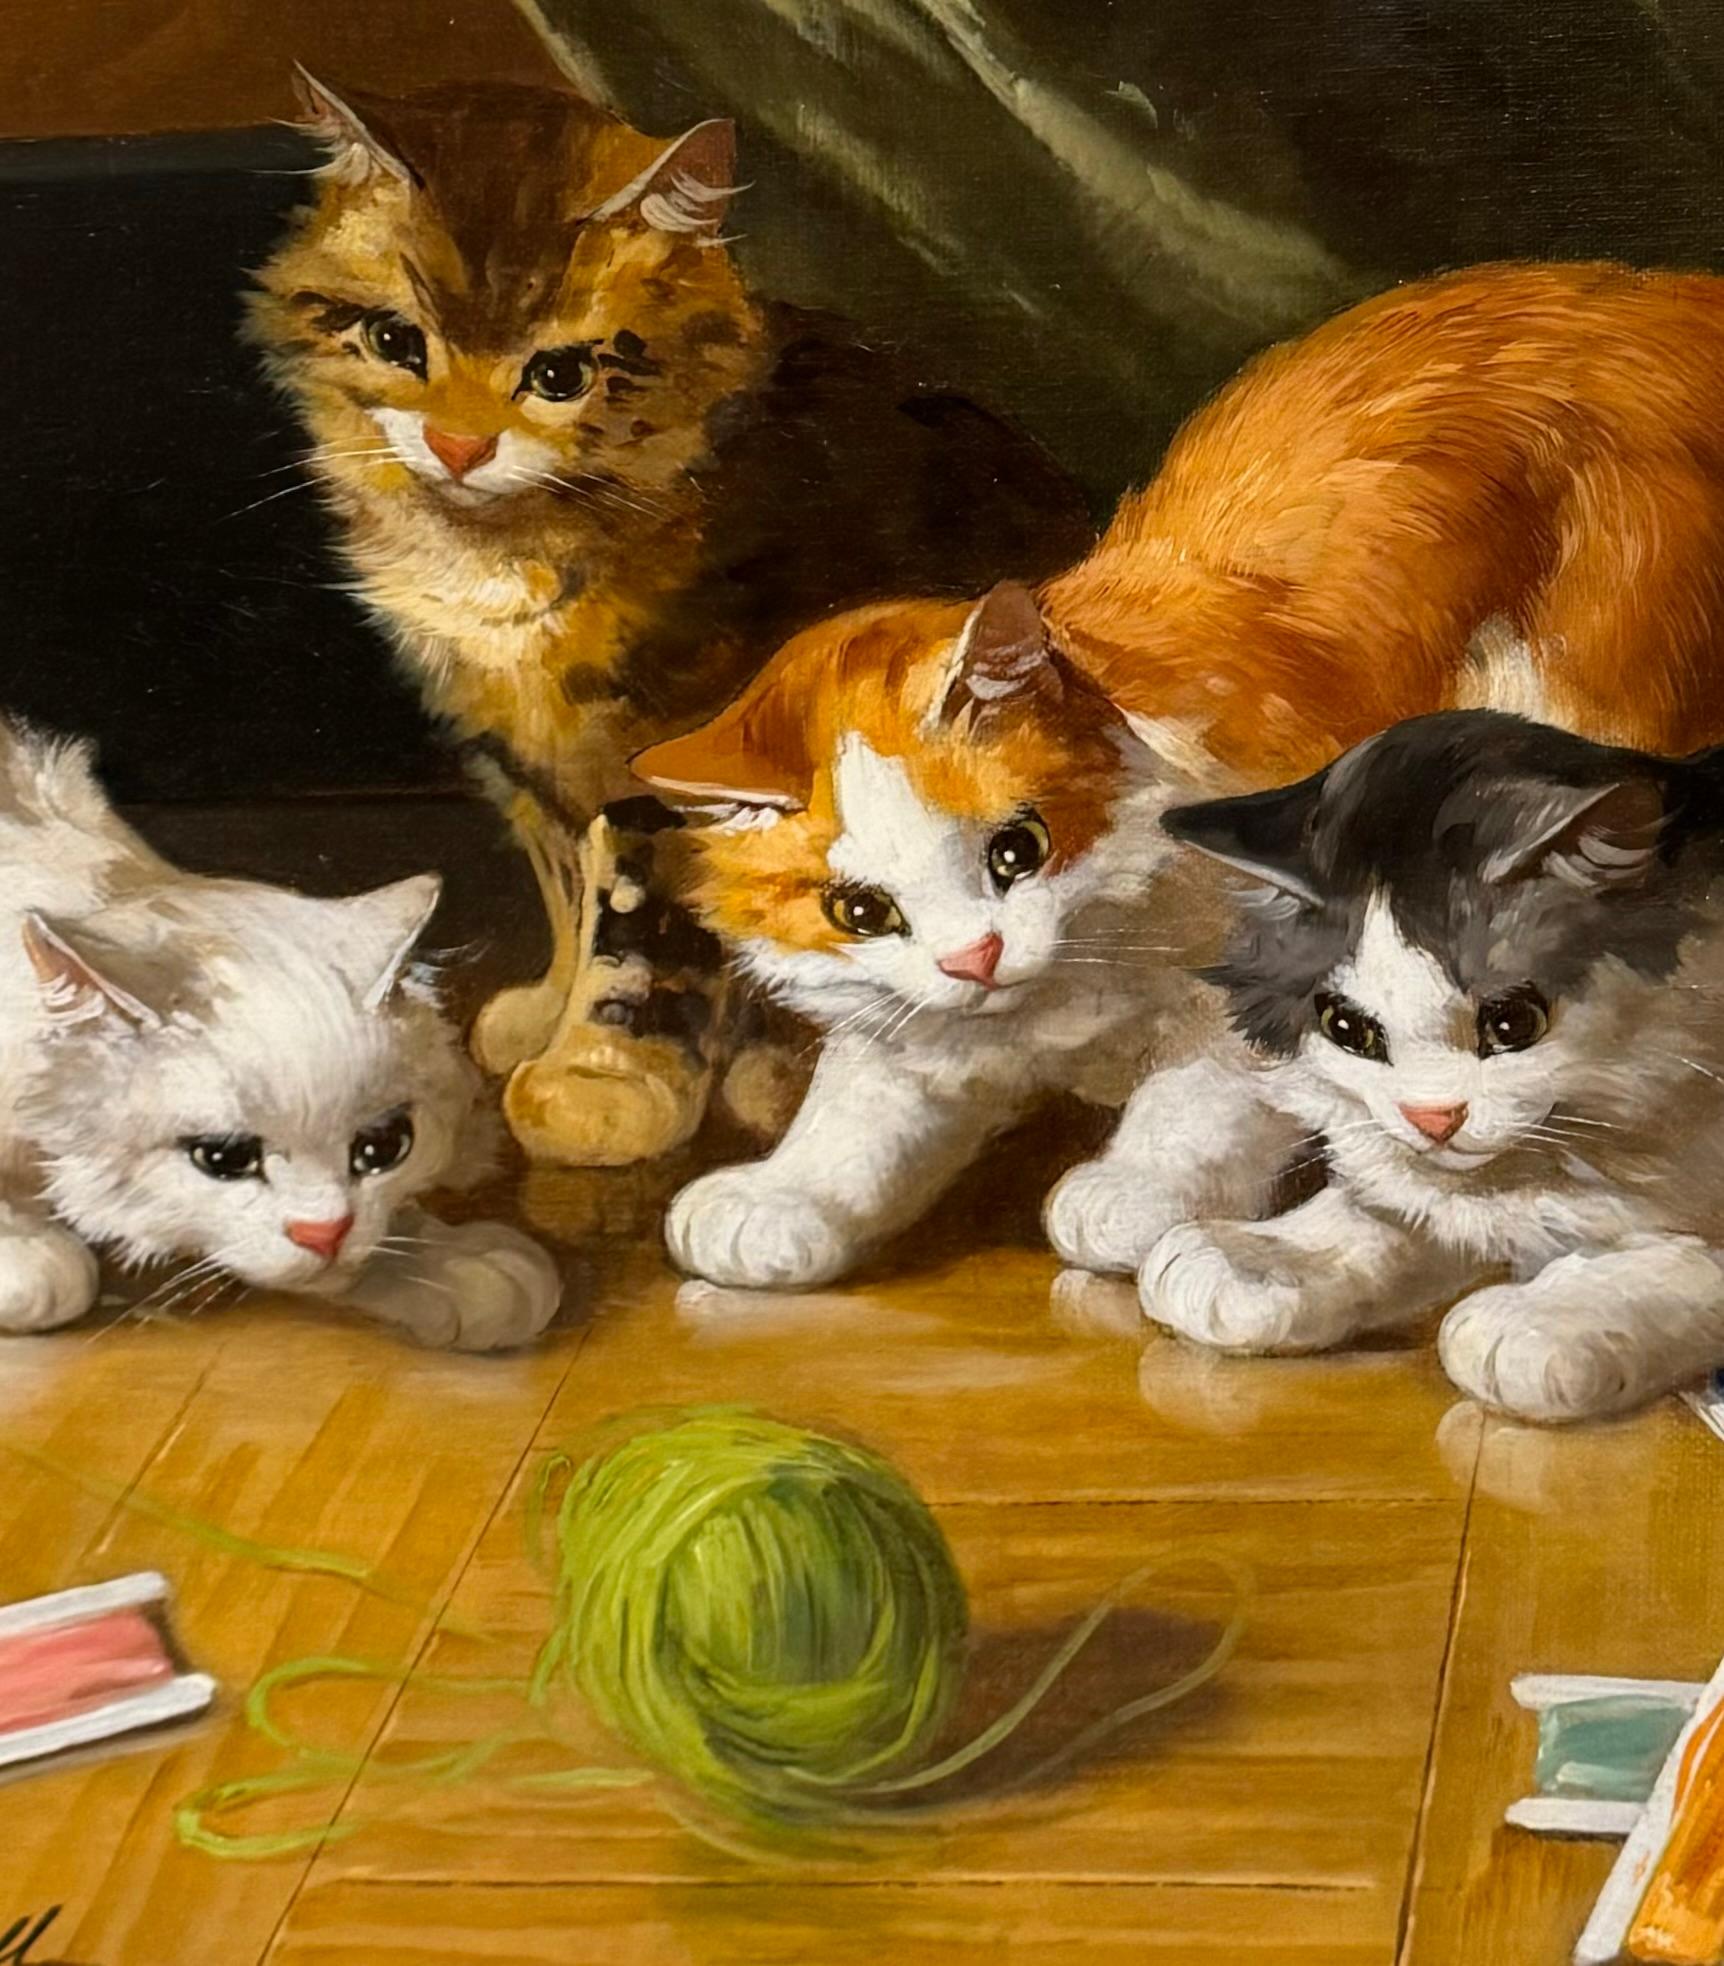 Hand-Painted c.1900 Oil on Canvas ‘Kittens at play’ by AA Brunel de Neuville 